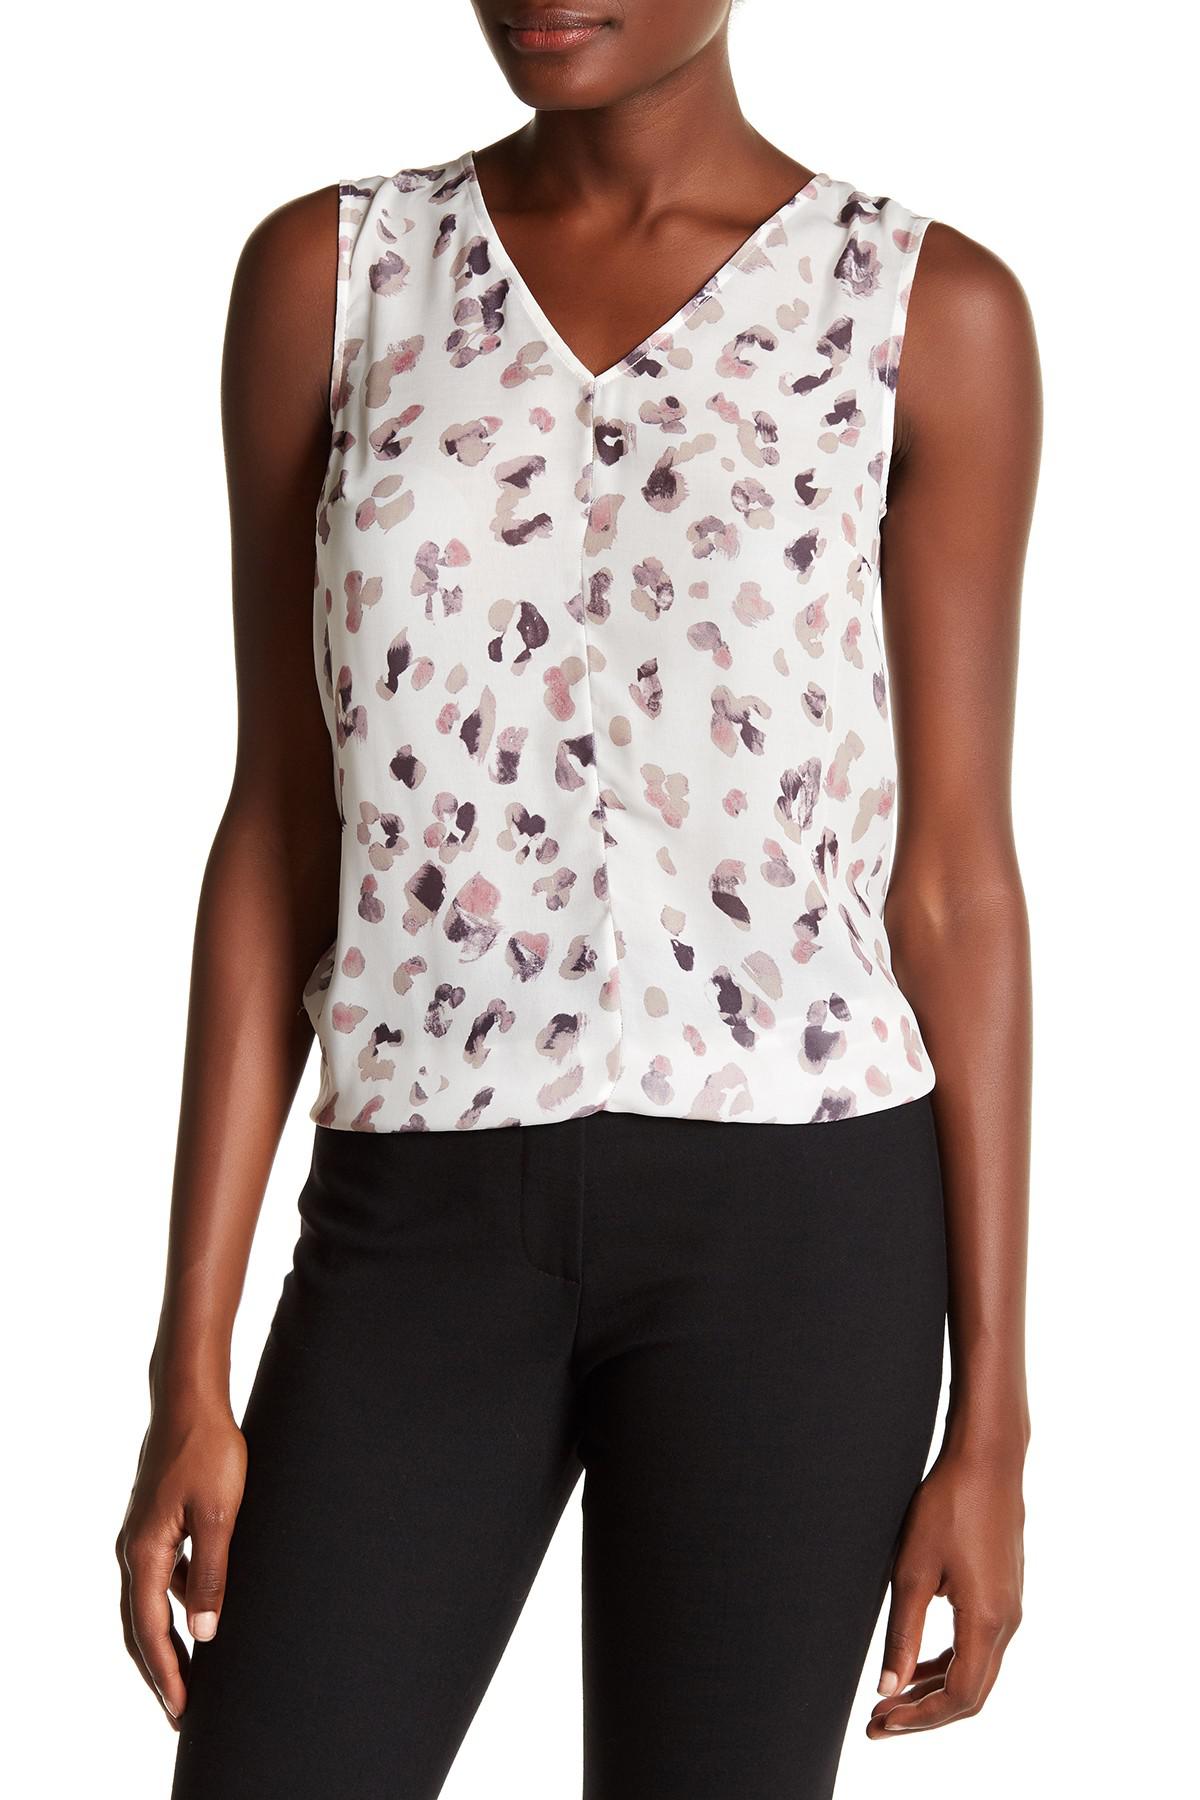 Lyst - Hobbs Flora Trapeze Blouse in White